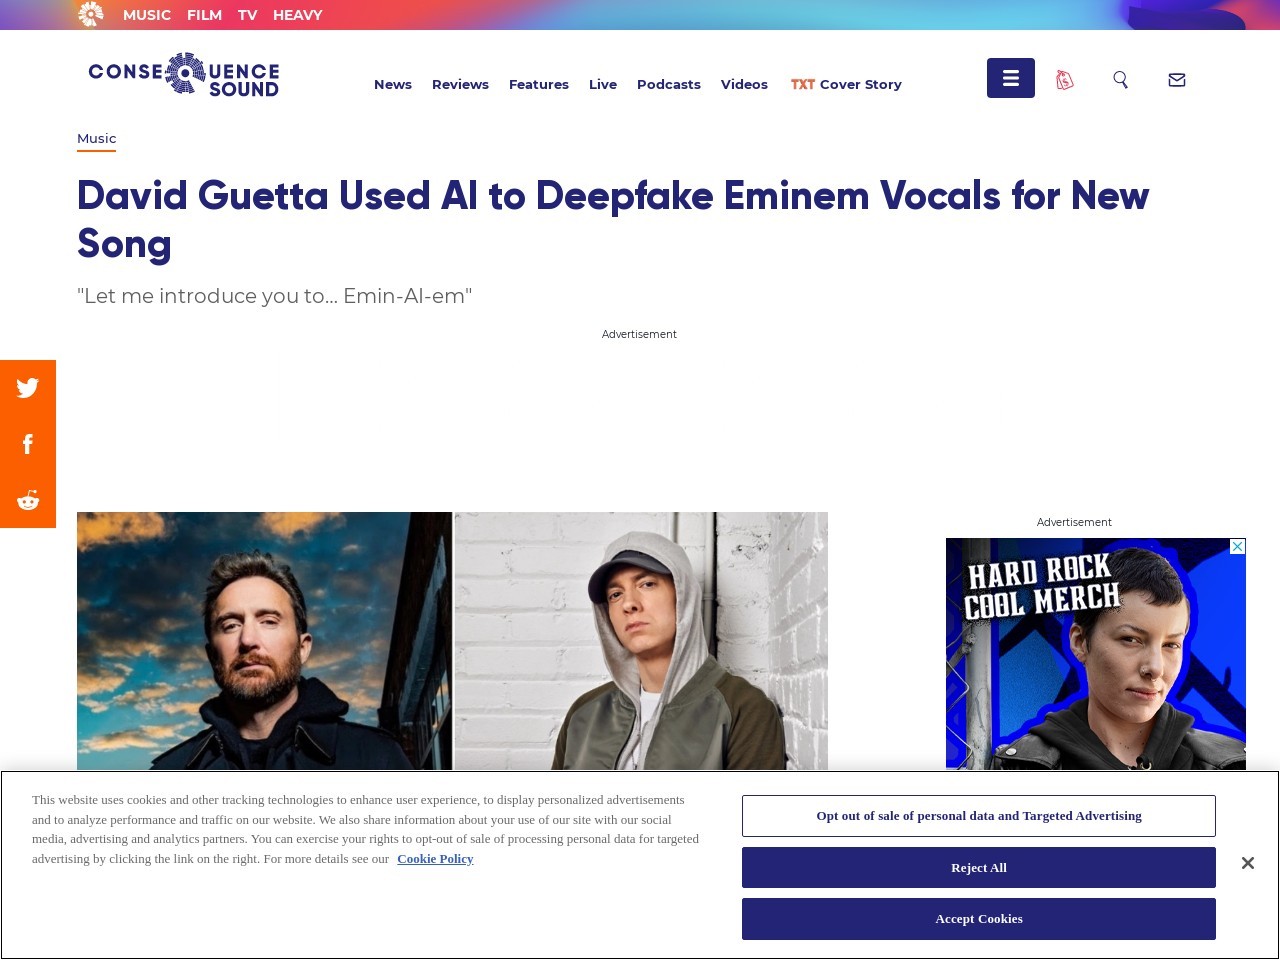 David Guetta Used AI to Deepfake Eminem Vocals for New Song